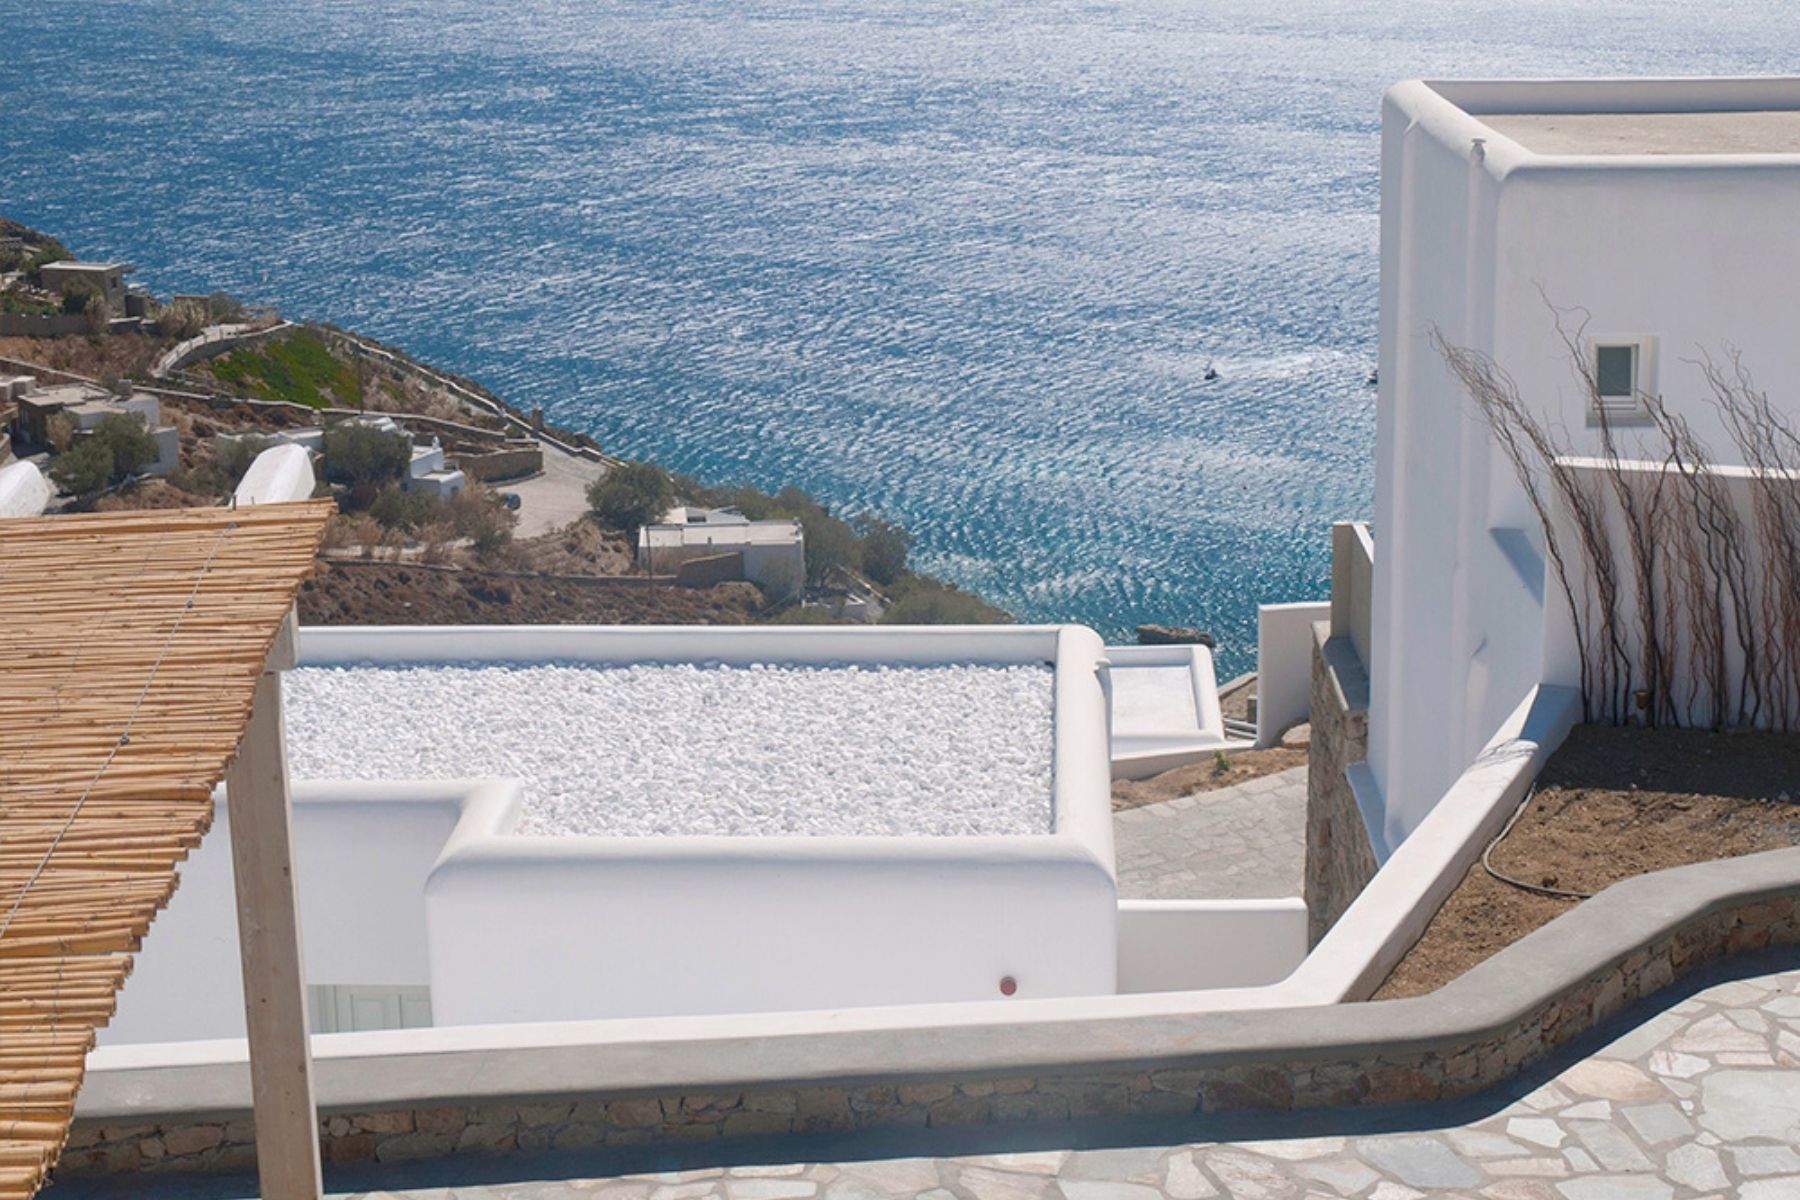 island roof top covered in white marble pebbles reflecting heat